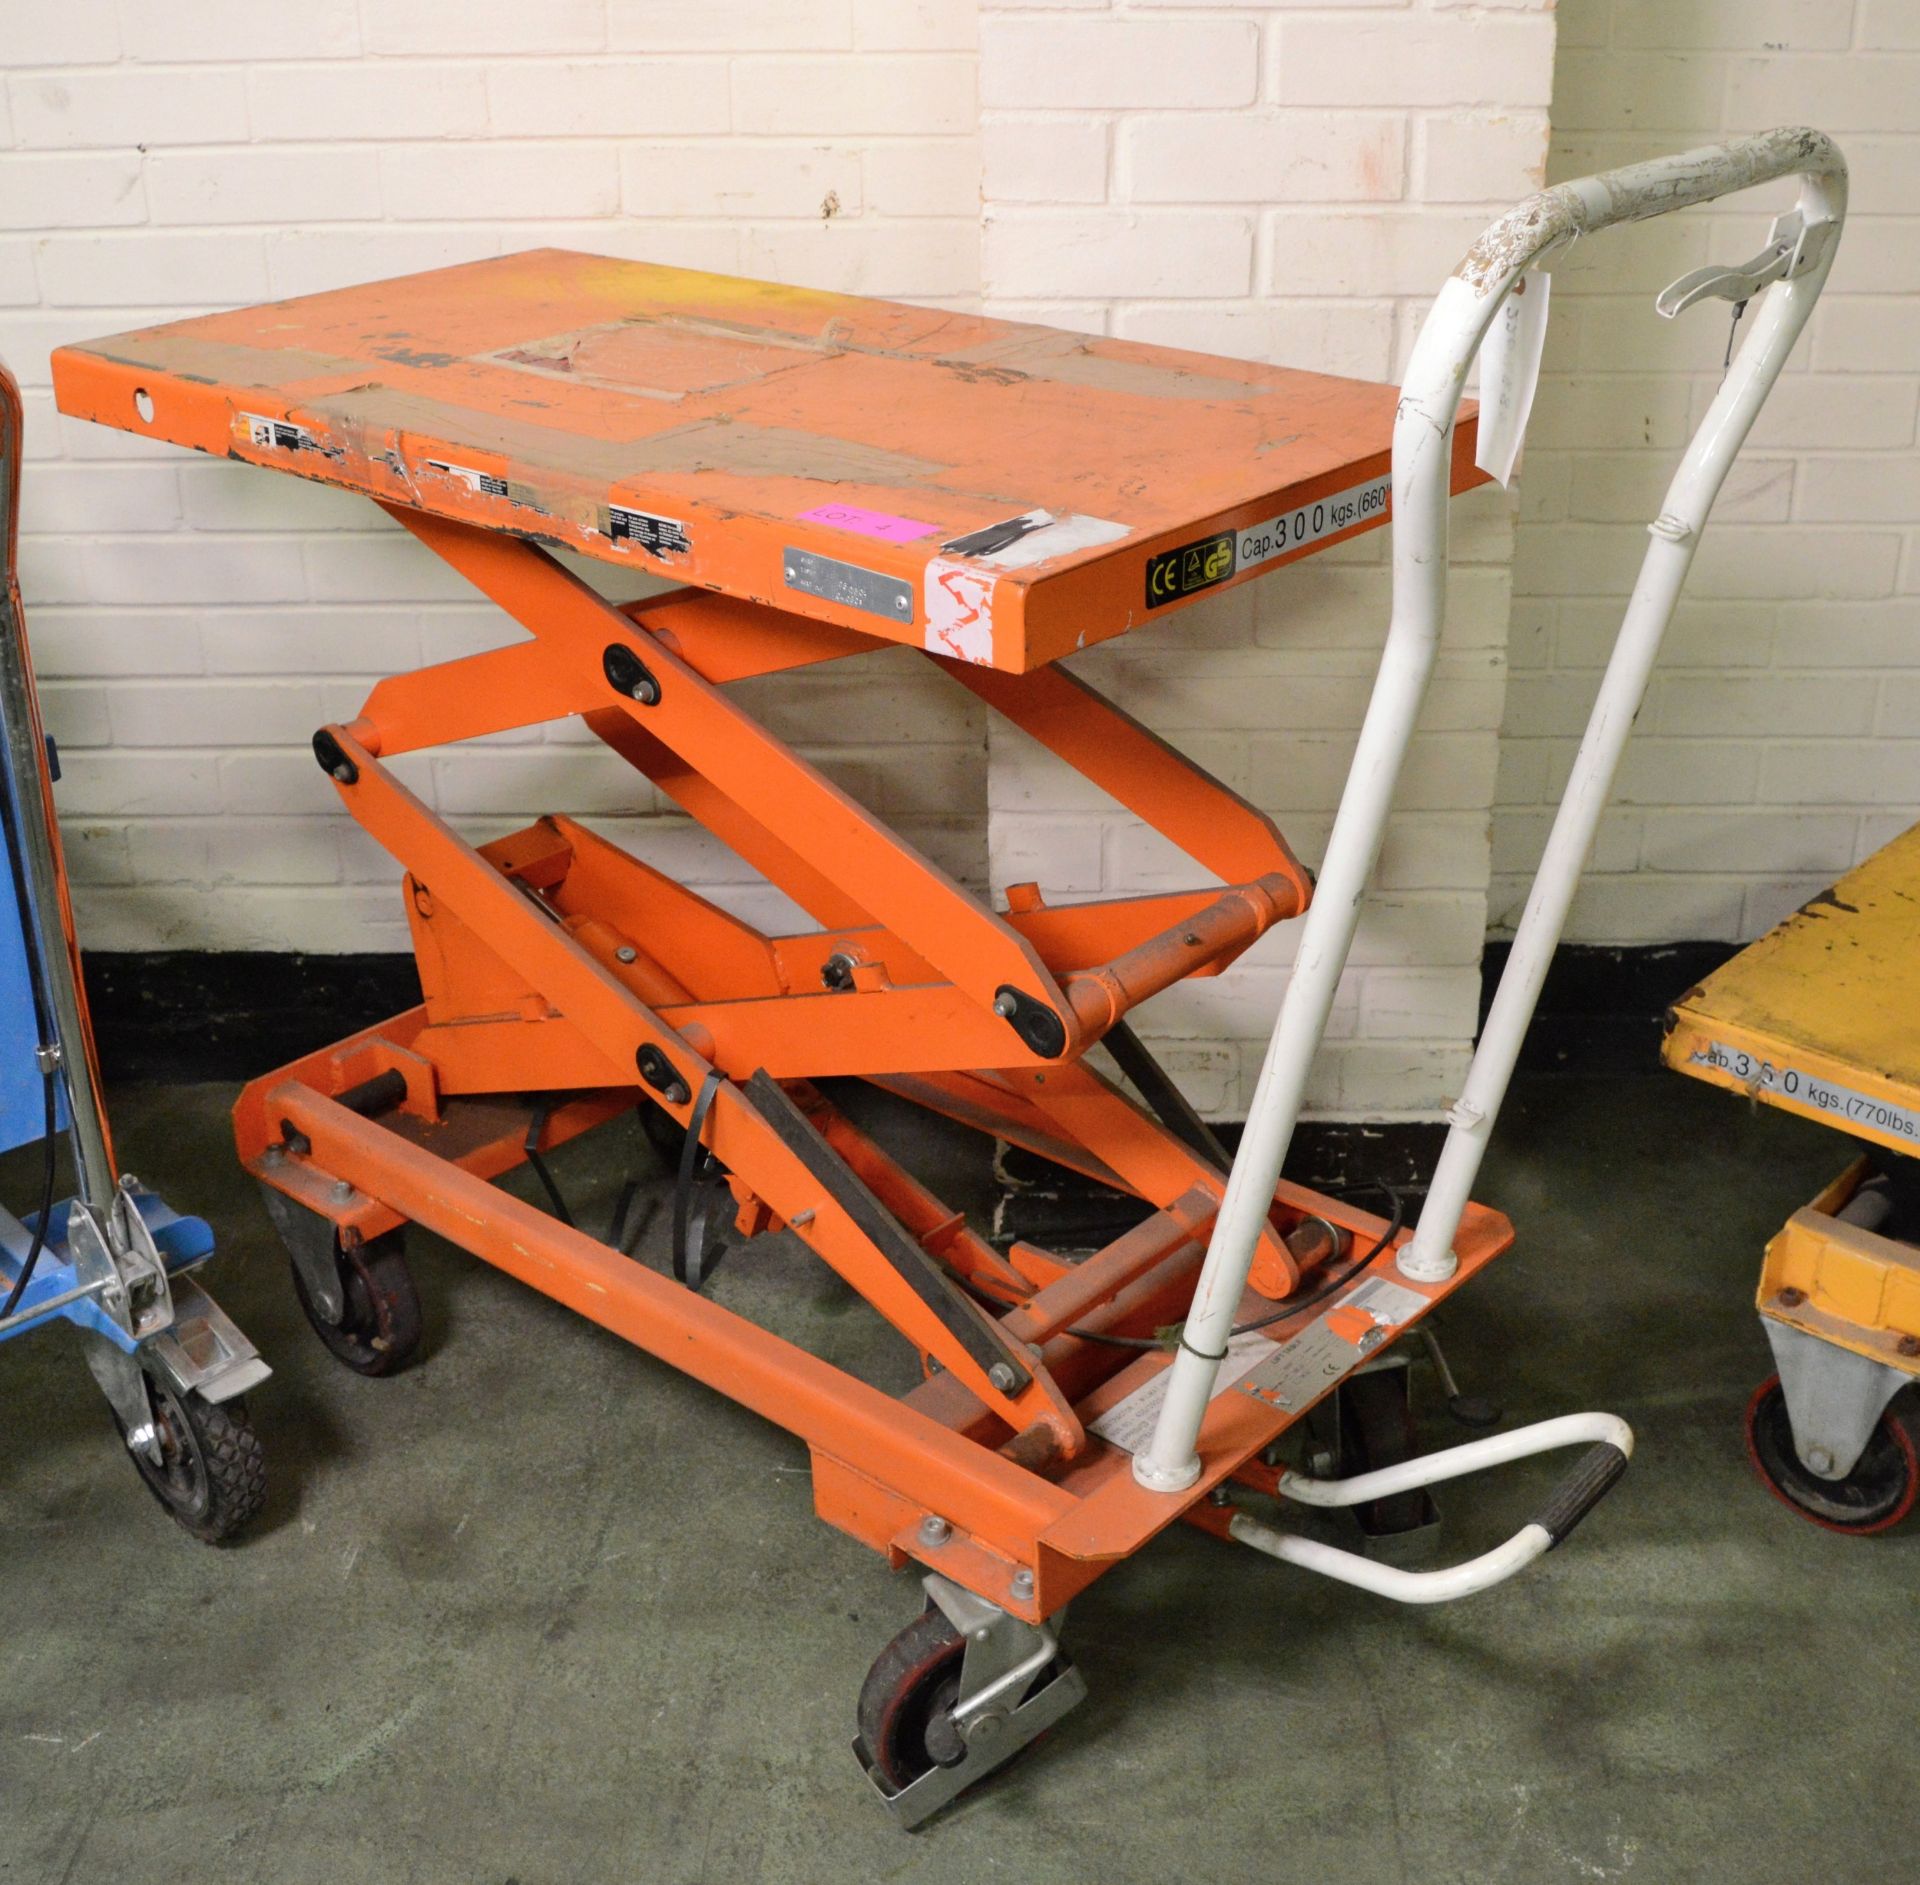 Mobile Platform Lift L1120 X W520mm - In need of attention.